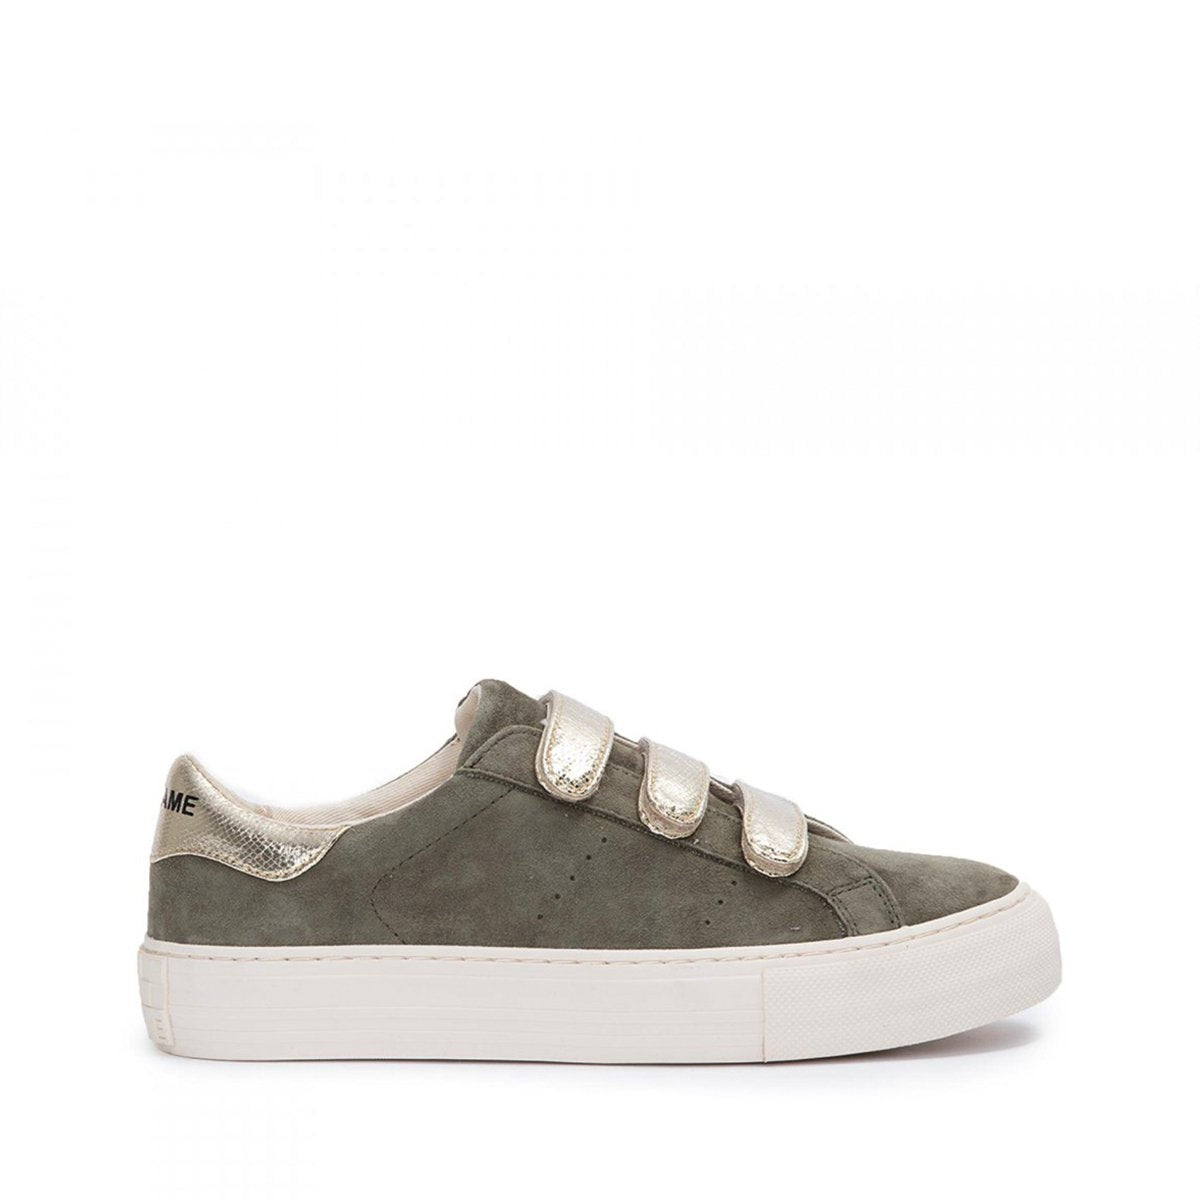 Arcade Straps Suede Foret Sneakers KNGDWI042L - 1